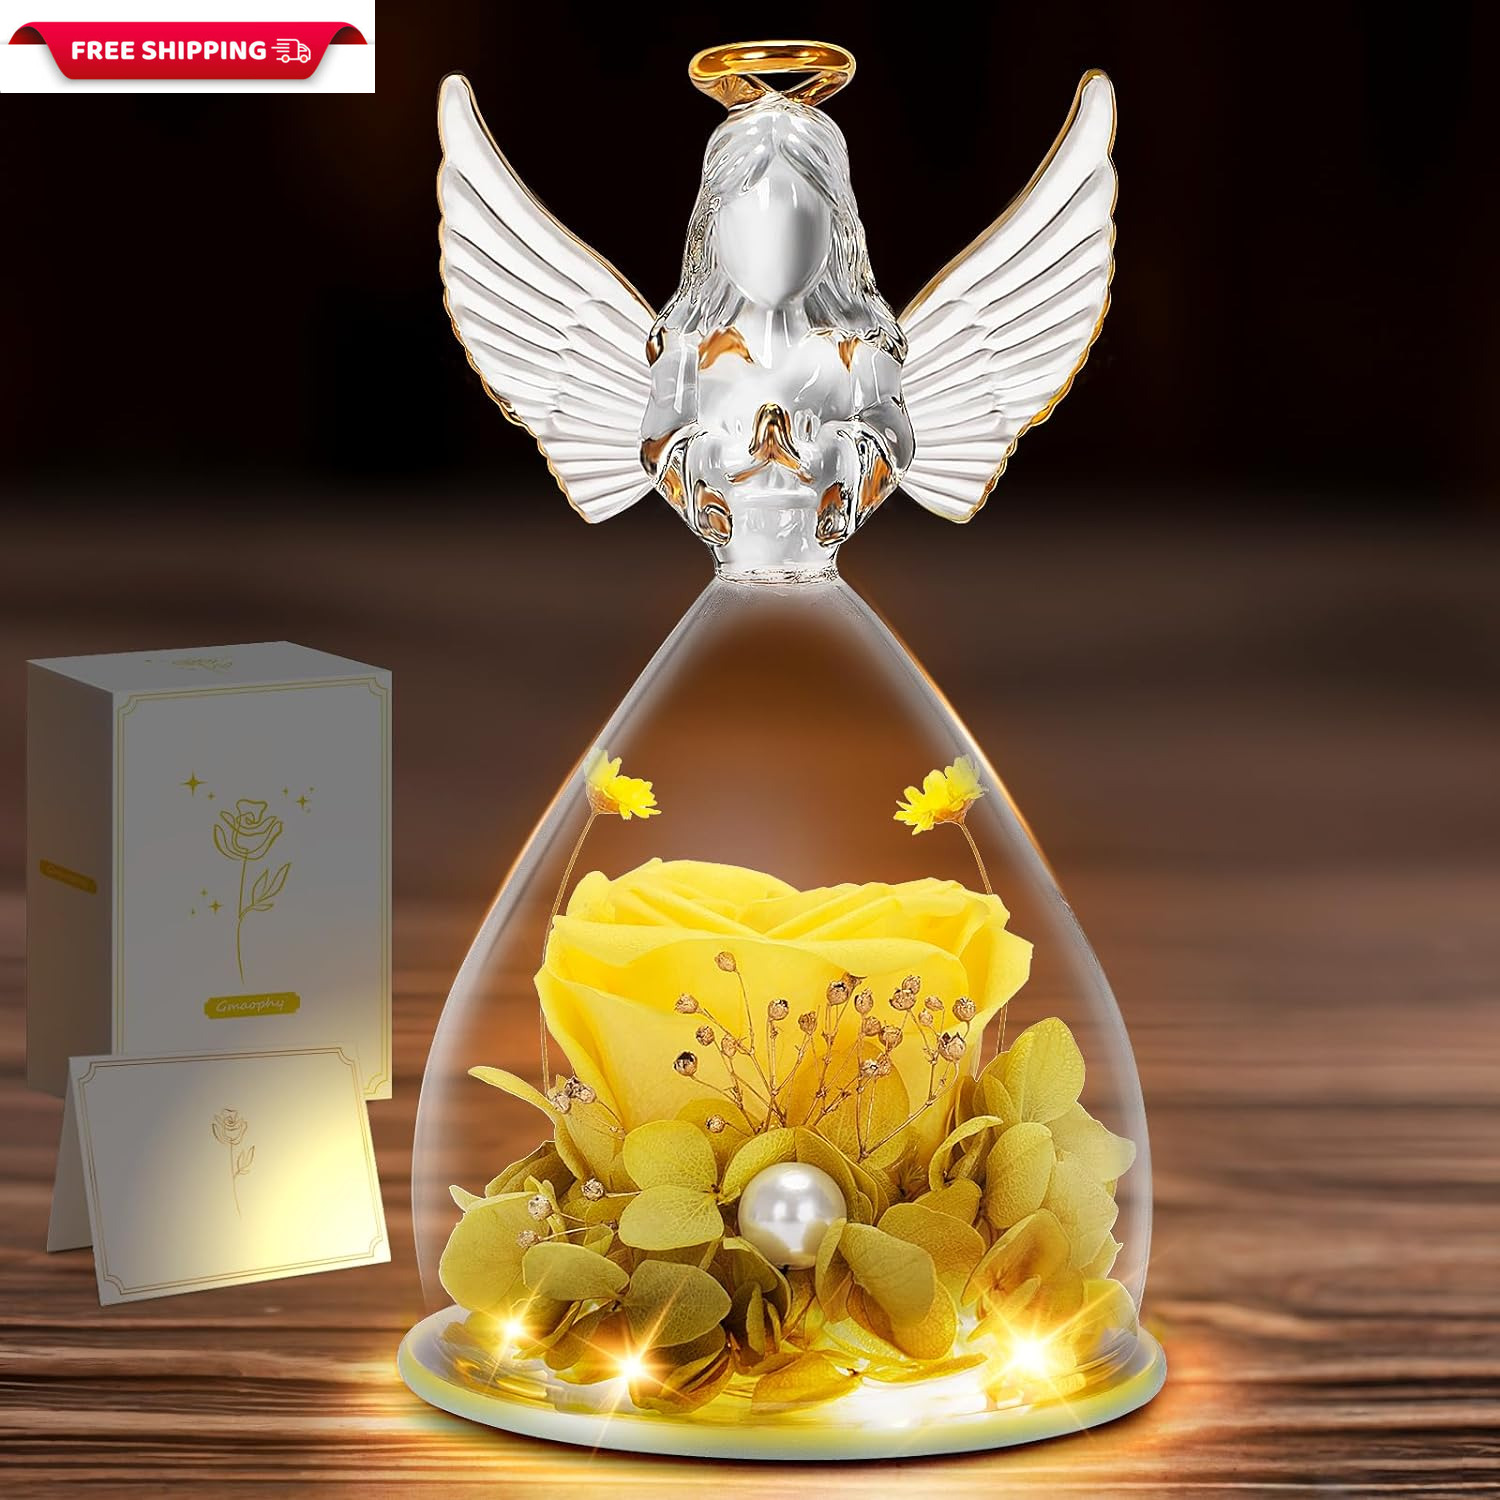 Preserved Flowers Gift for Mom, Grandma, Angel Figurine with Yellow Rose & Light